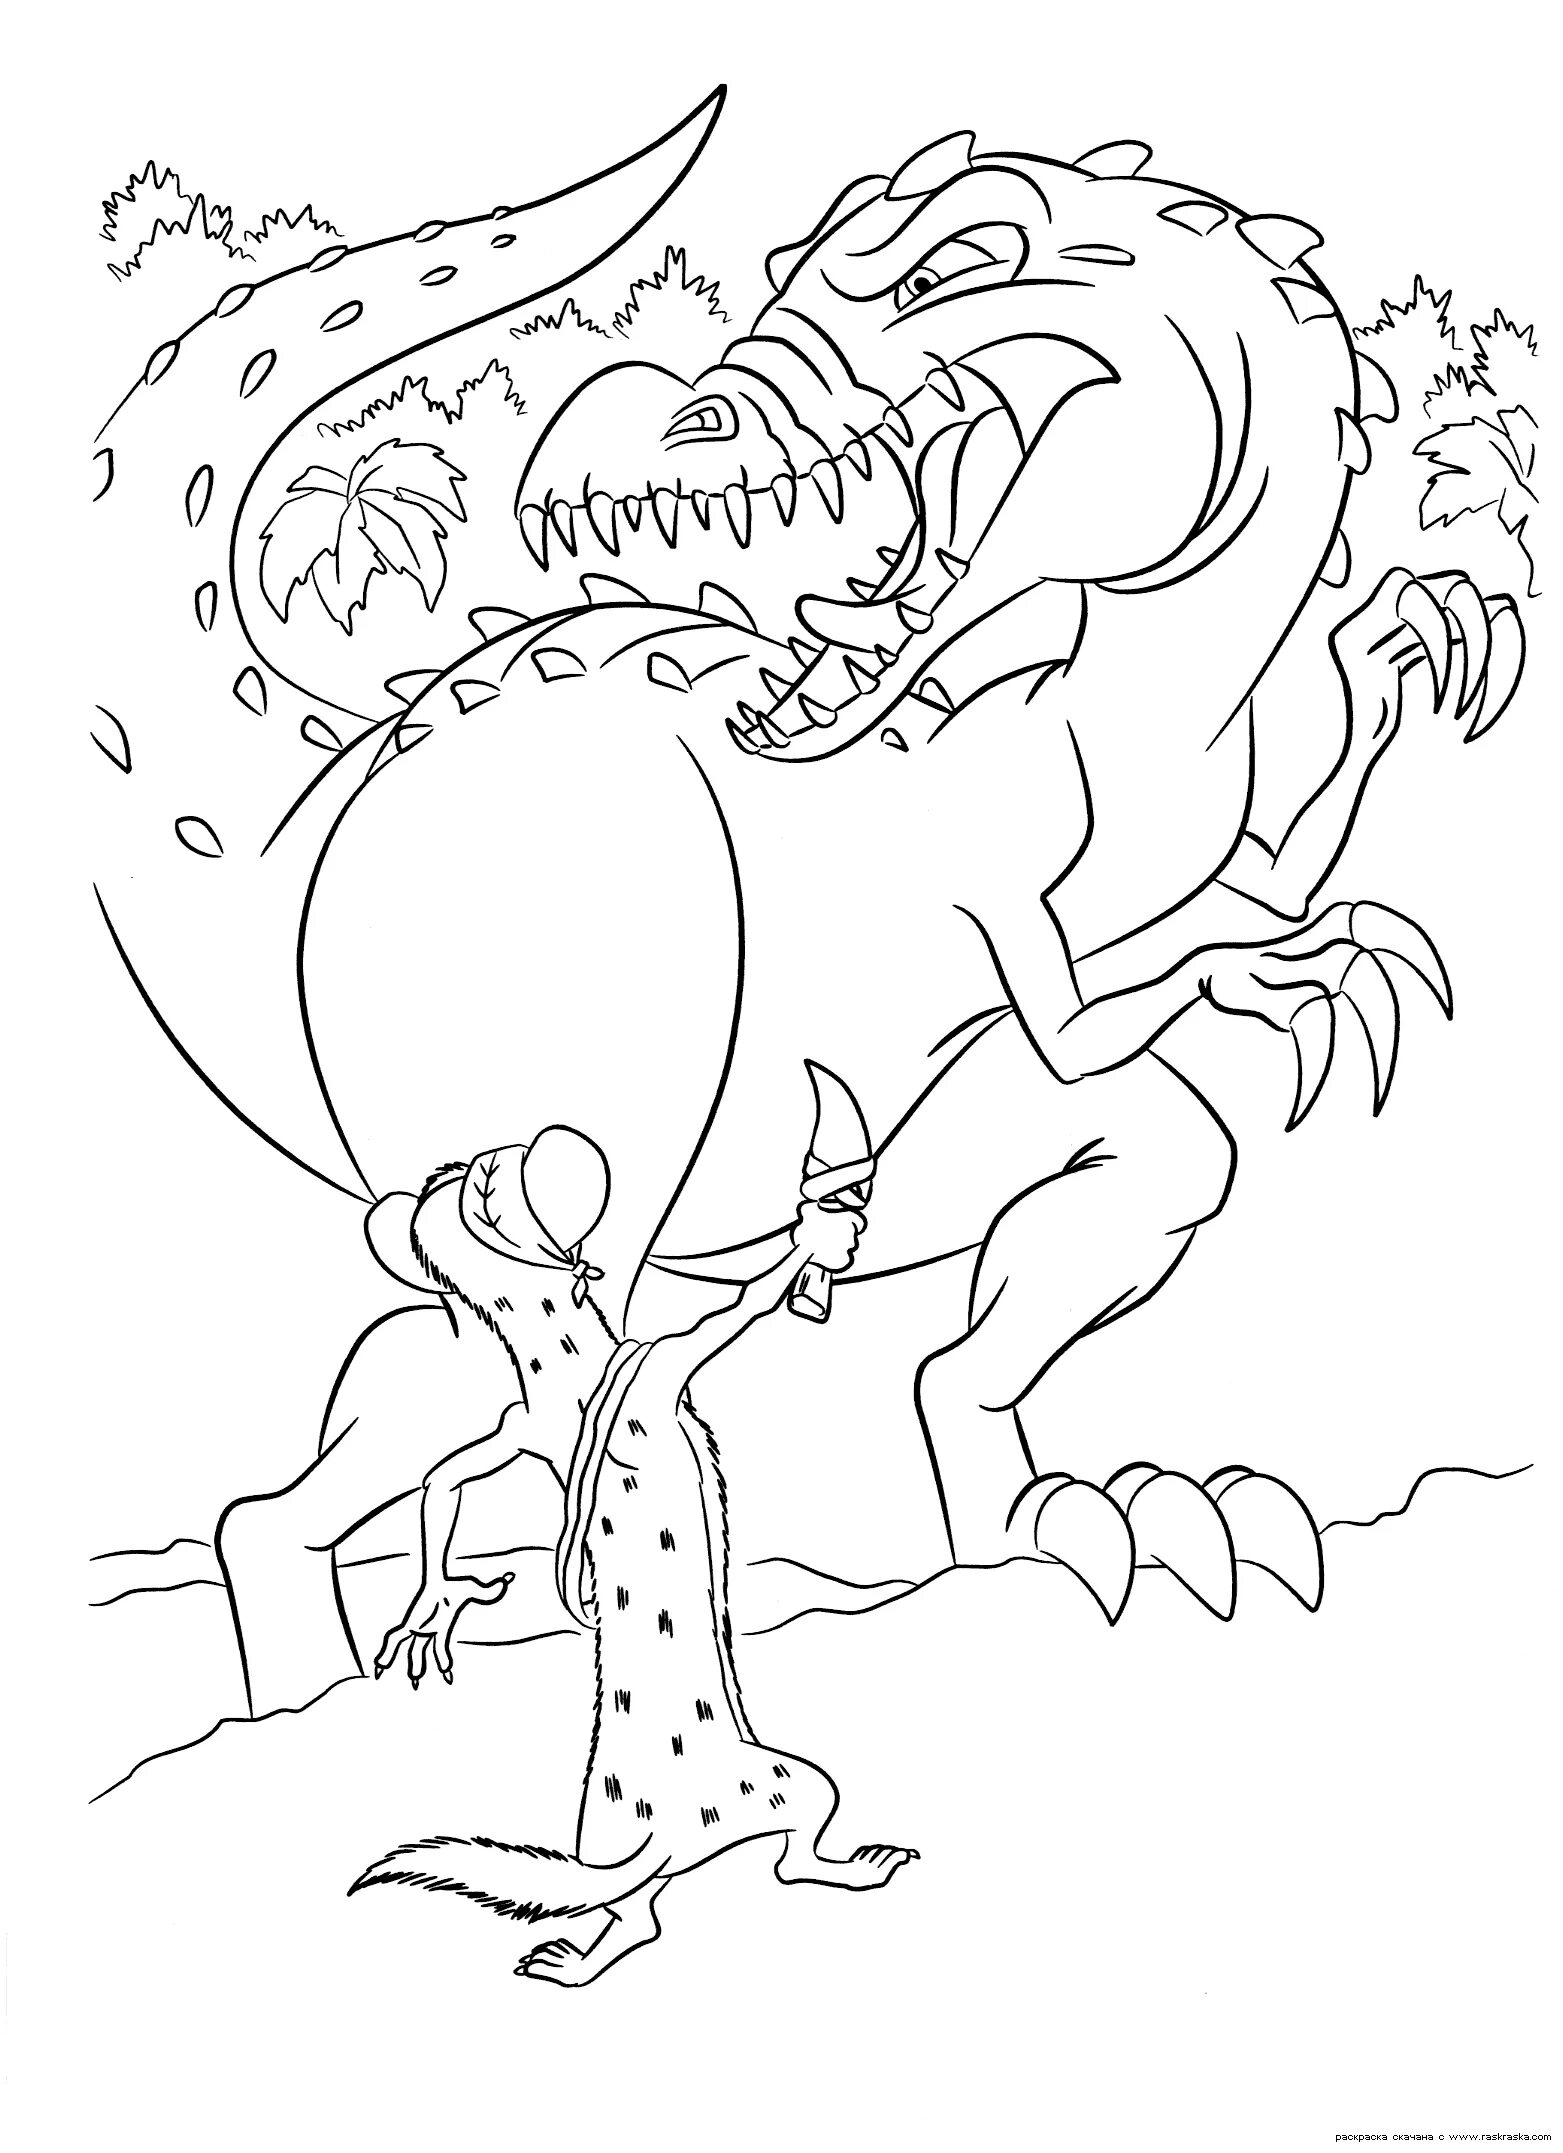 Unique Ice Age Dinosaur Time coloring page